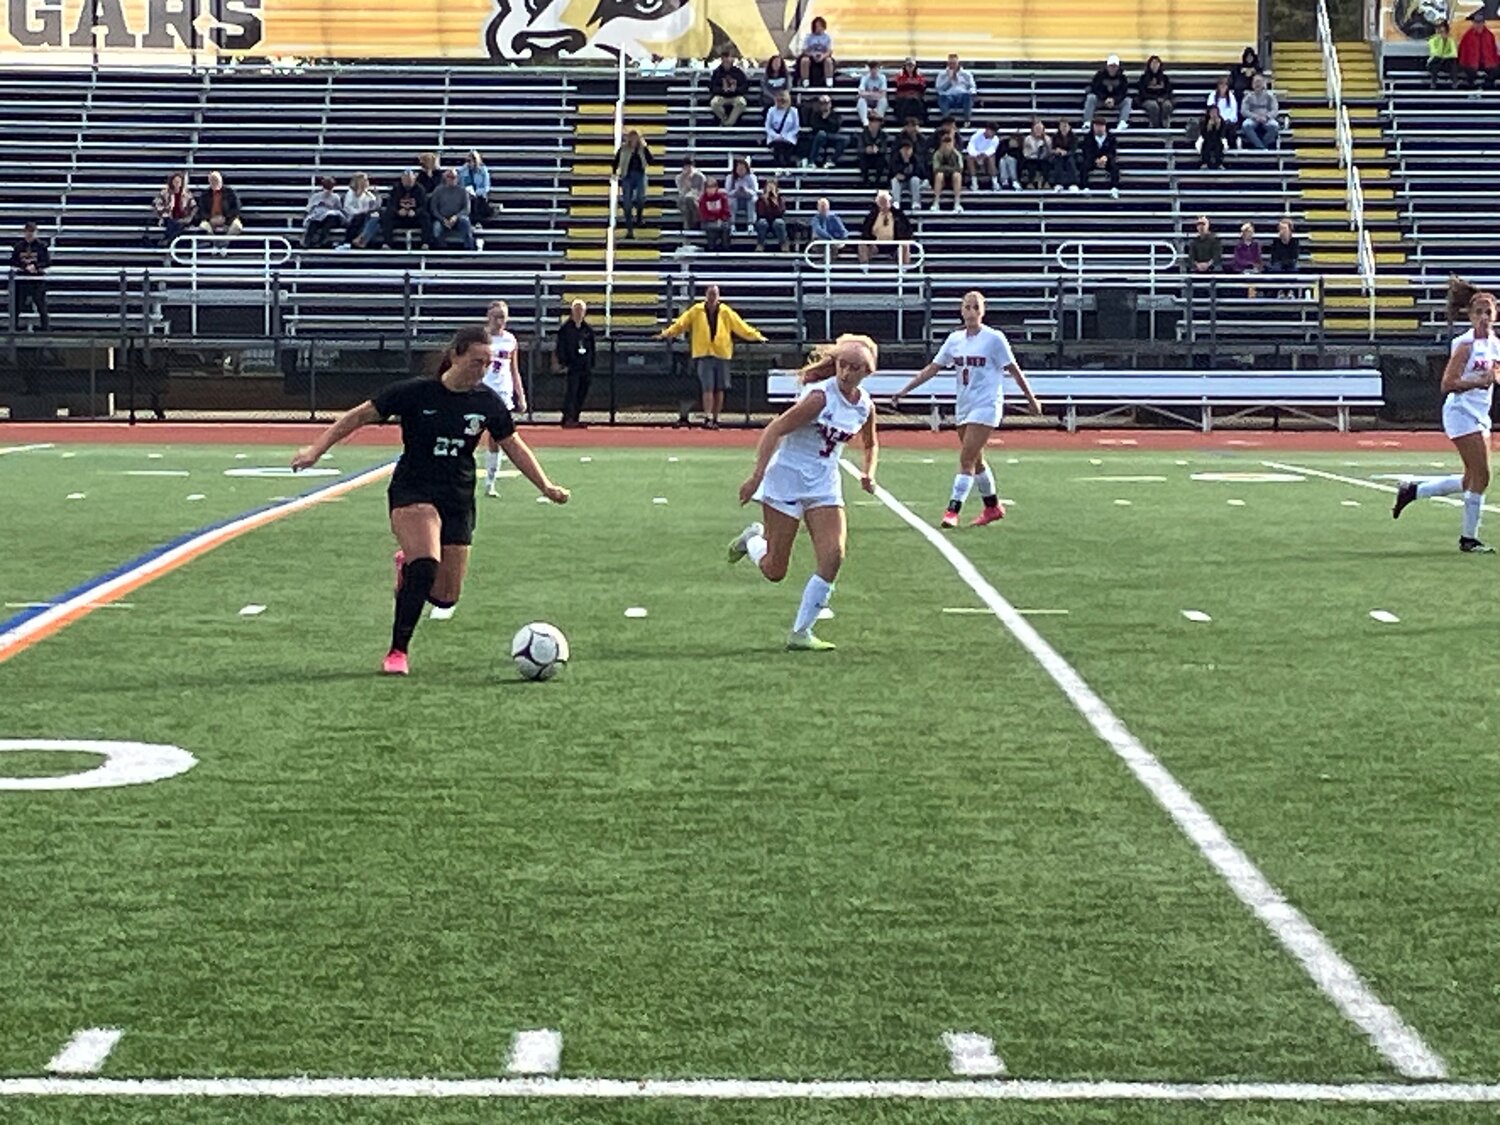 Patchogue-Medford, a No. 7 seed, faced a tough opponent in No. 2 seed Commack. Commack came away with a narrow 1-0 victory.